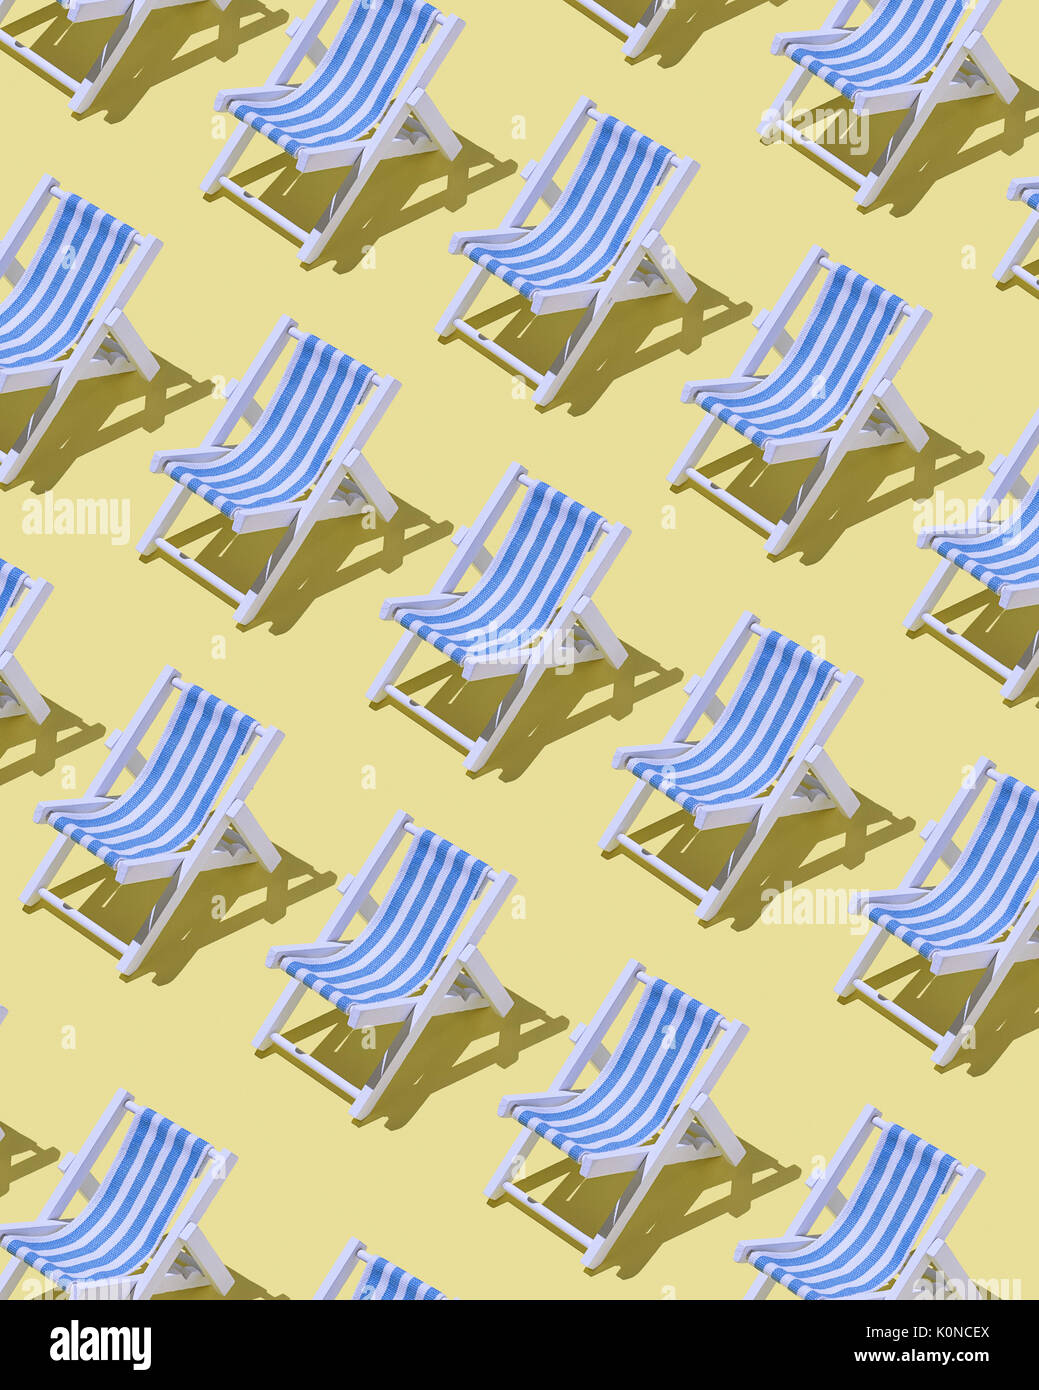 Rows of beach chairs on yellow ground, 3D Rendering Stock Photo